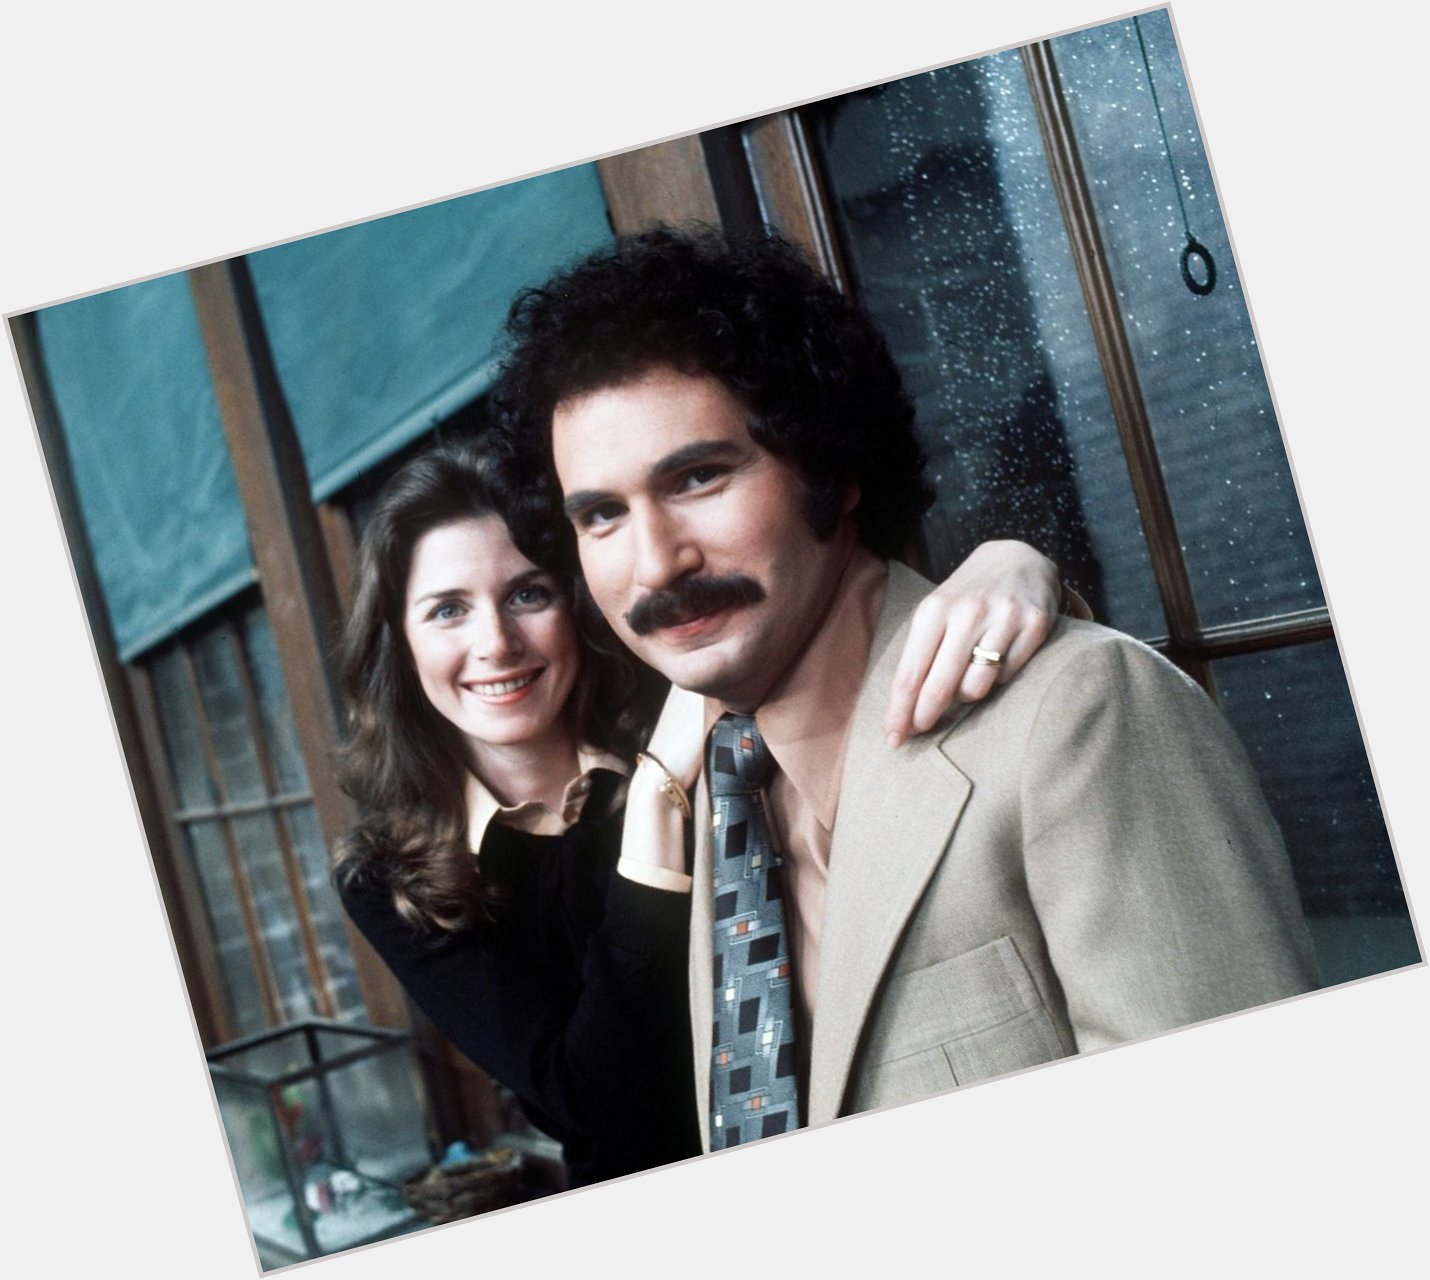 Happy Birthday to Gabe Kaplan who turns 75 today! Pictured here with Marcia Strassman on Welcome Back Kotter. 